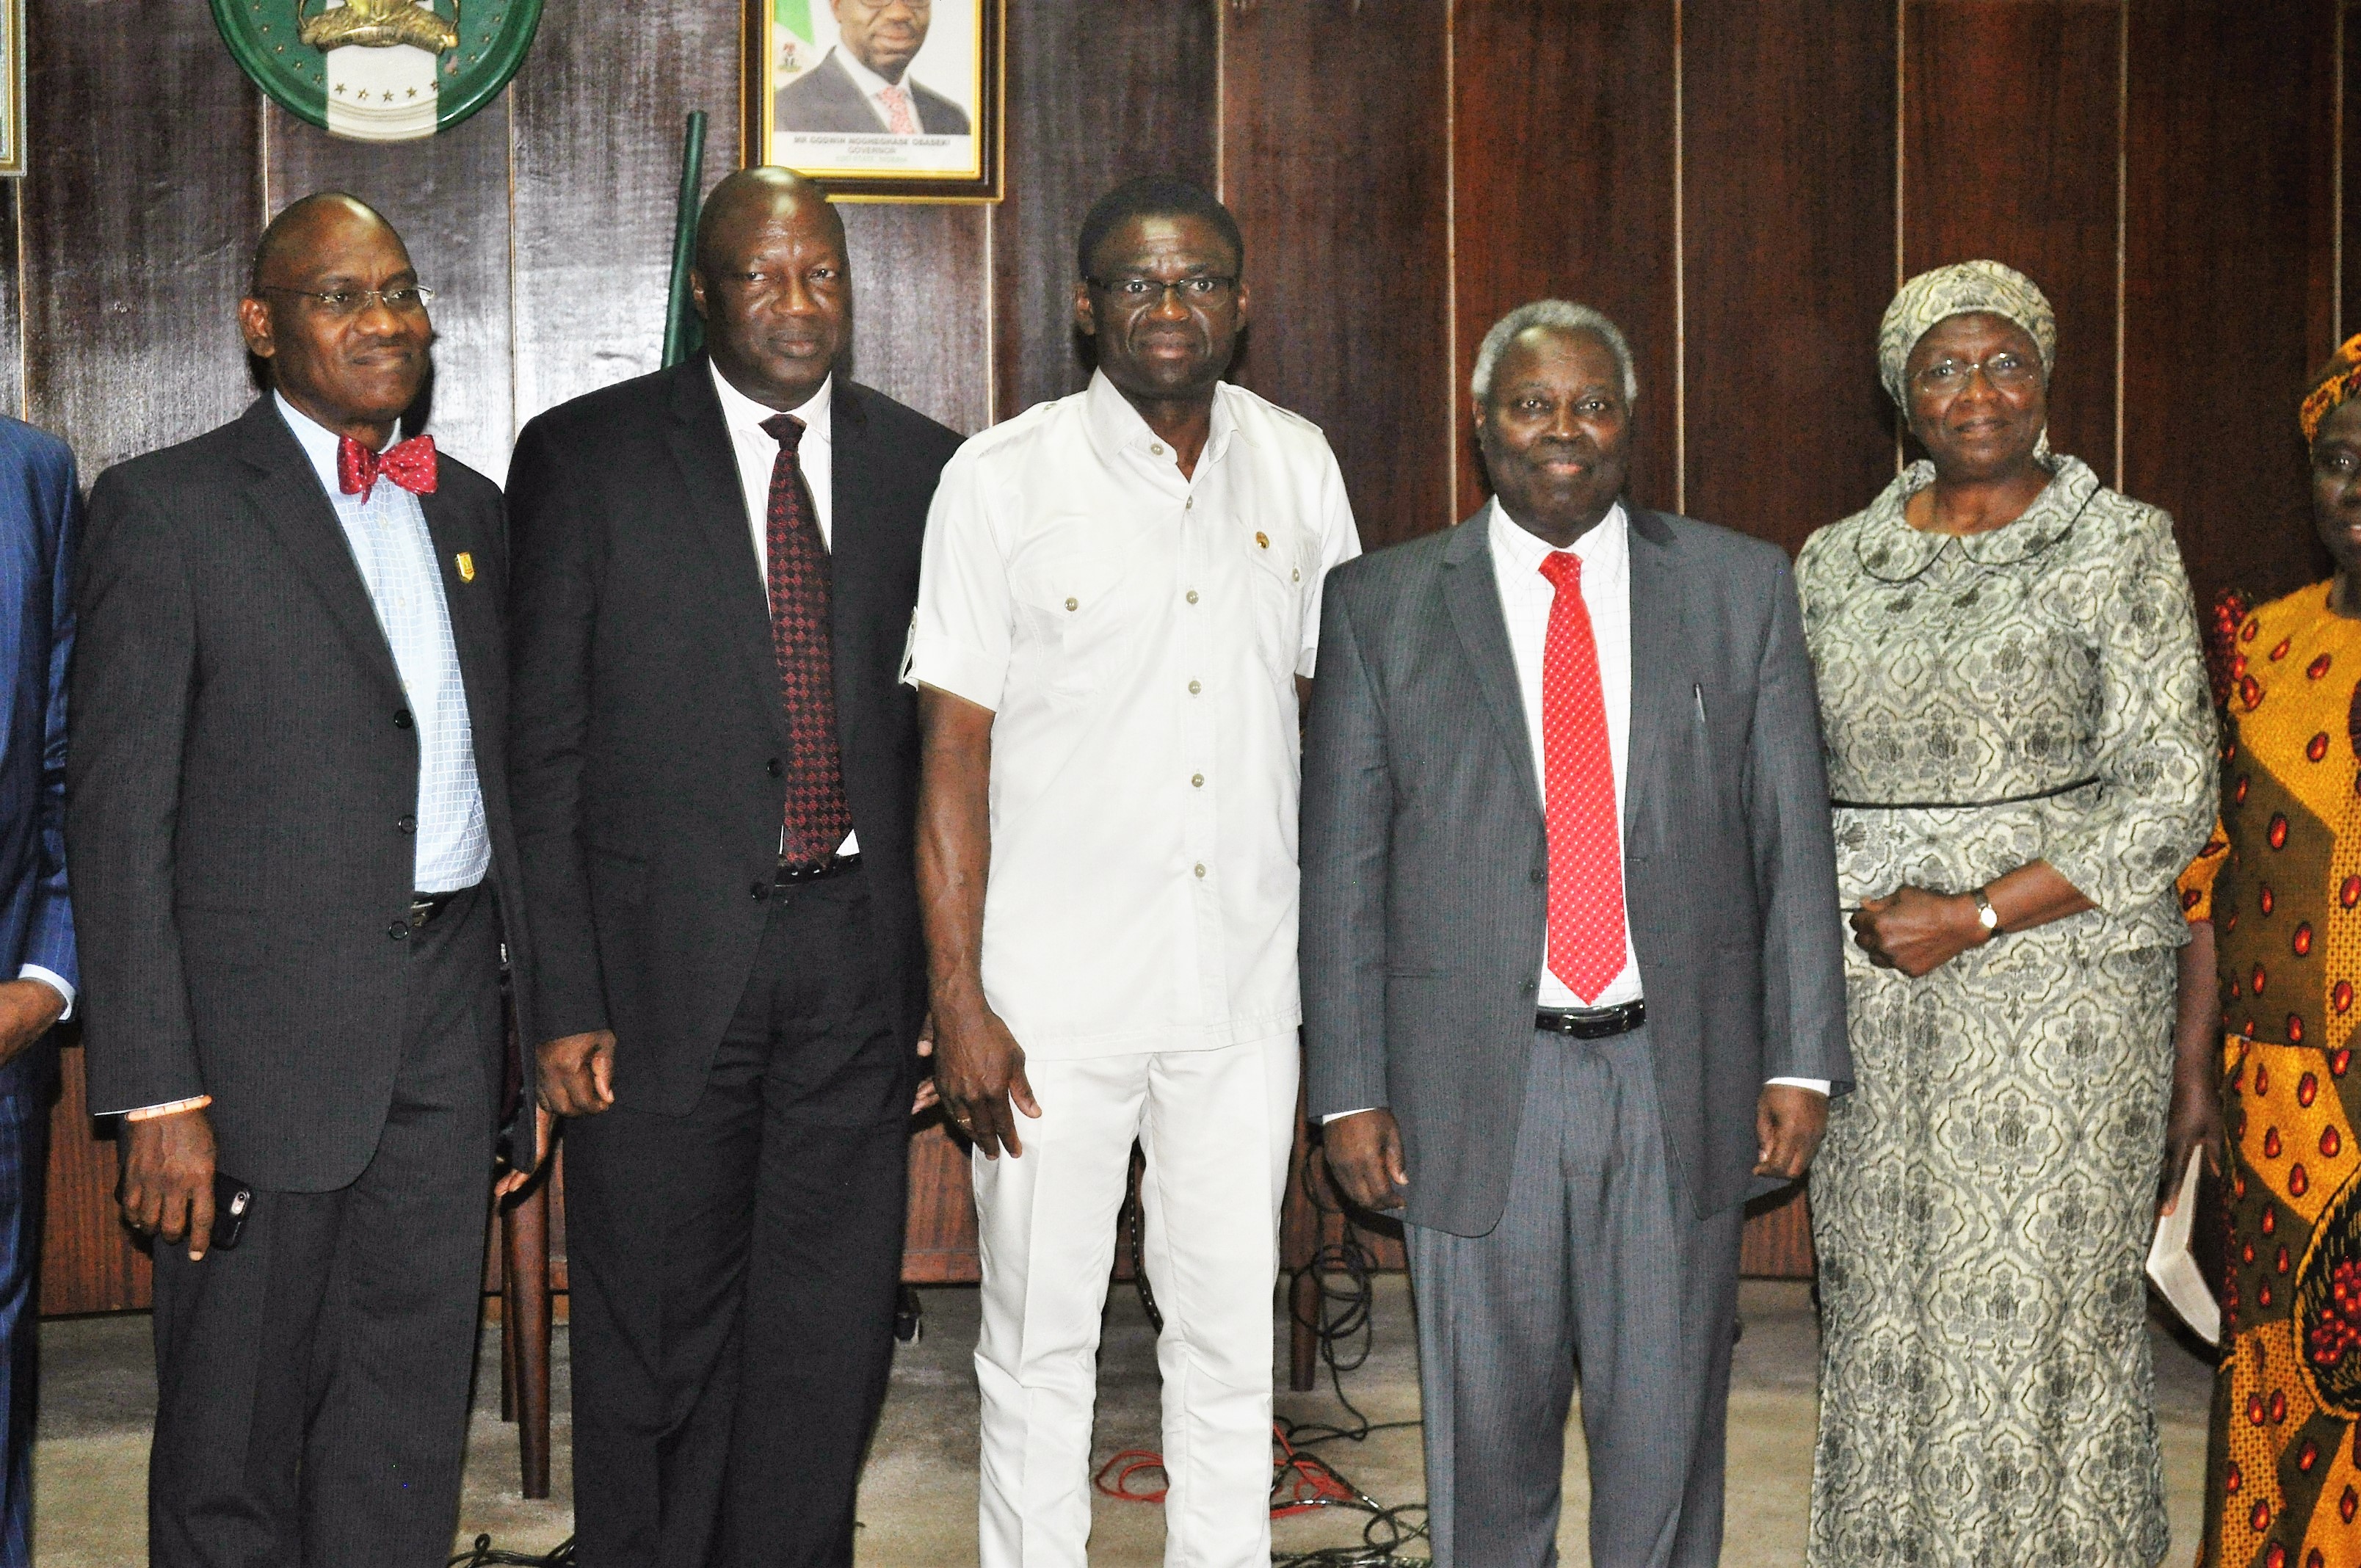 Group photo: L-R: Chief Oseni Elamah, the Executive Chairman, Edo State Internal Revenue Service, The Secretary to the State Government, Osarodion Ogie Esq., the Deputy Governor of 	Edo State, Rt. Hon. Philip Shaibu, Pastor W. F. Kumuyi the General Superintendent of the 	Deeper 	Christian Life Ministry and Mrs. Esther Kumuyi the wife of the General Superintendent 